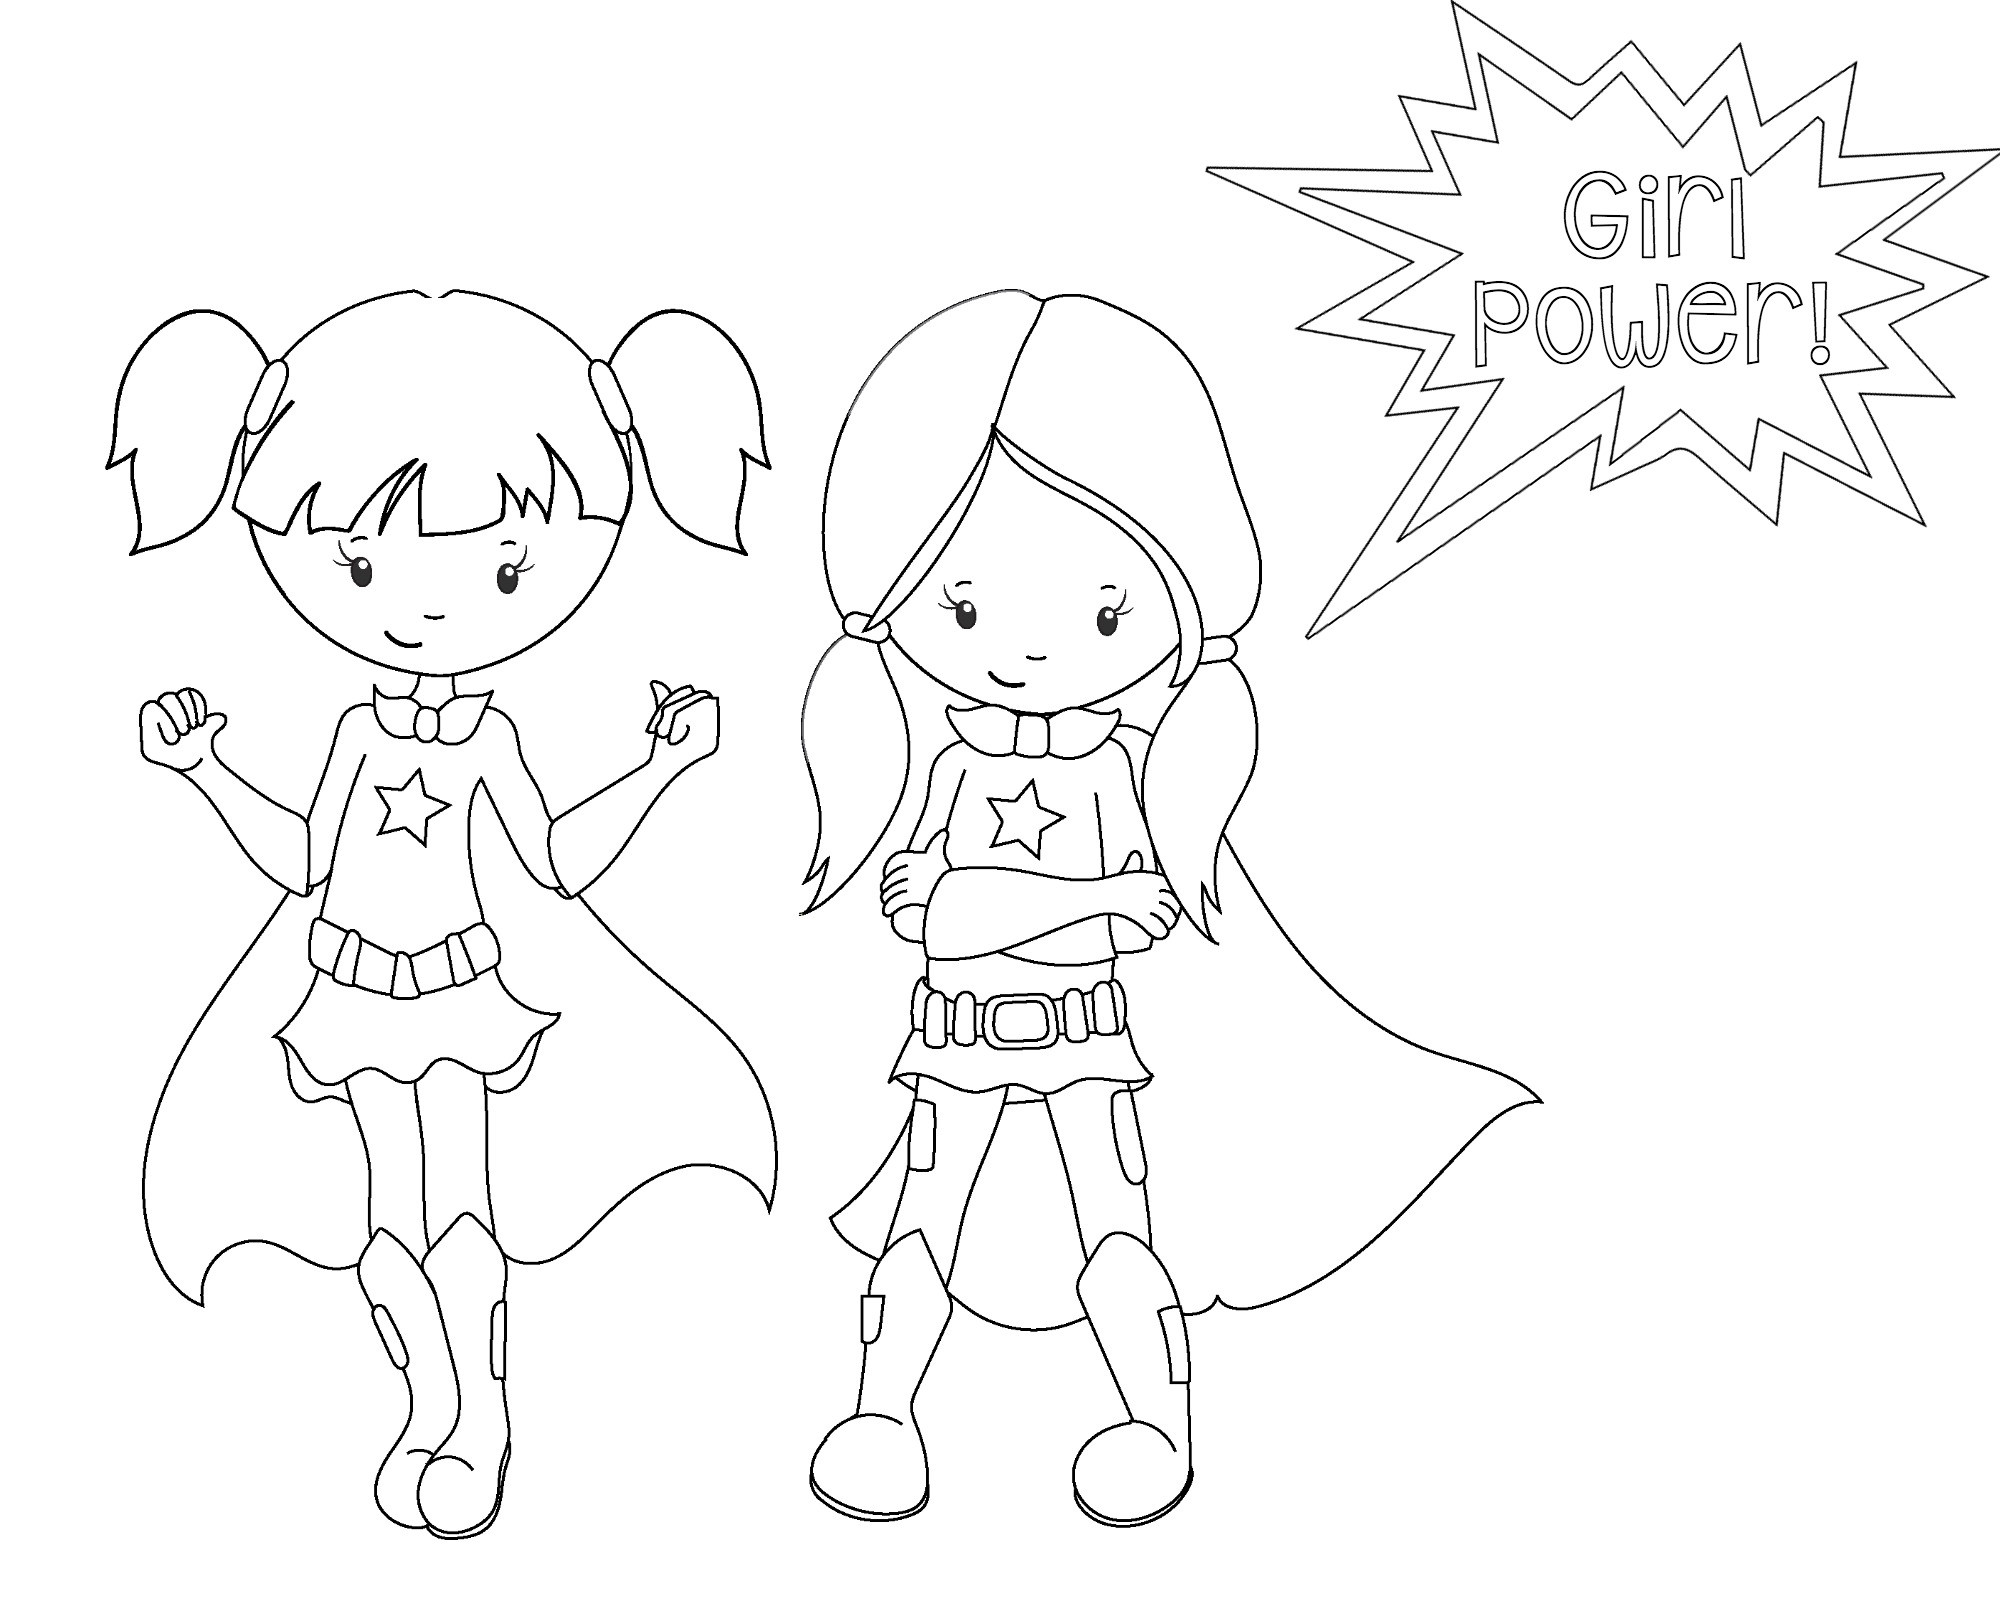 Kids Superhero Coloring Pages
 Superhero Coloring Pages Crazy Little Projects